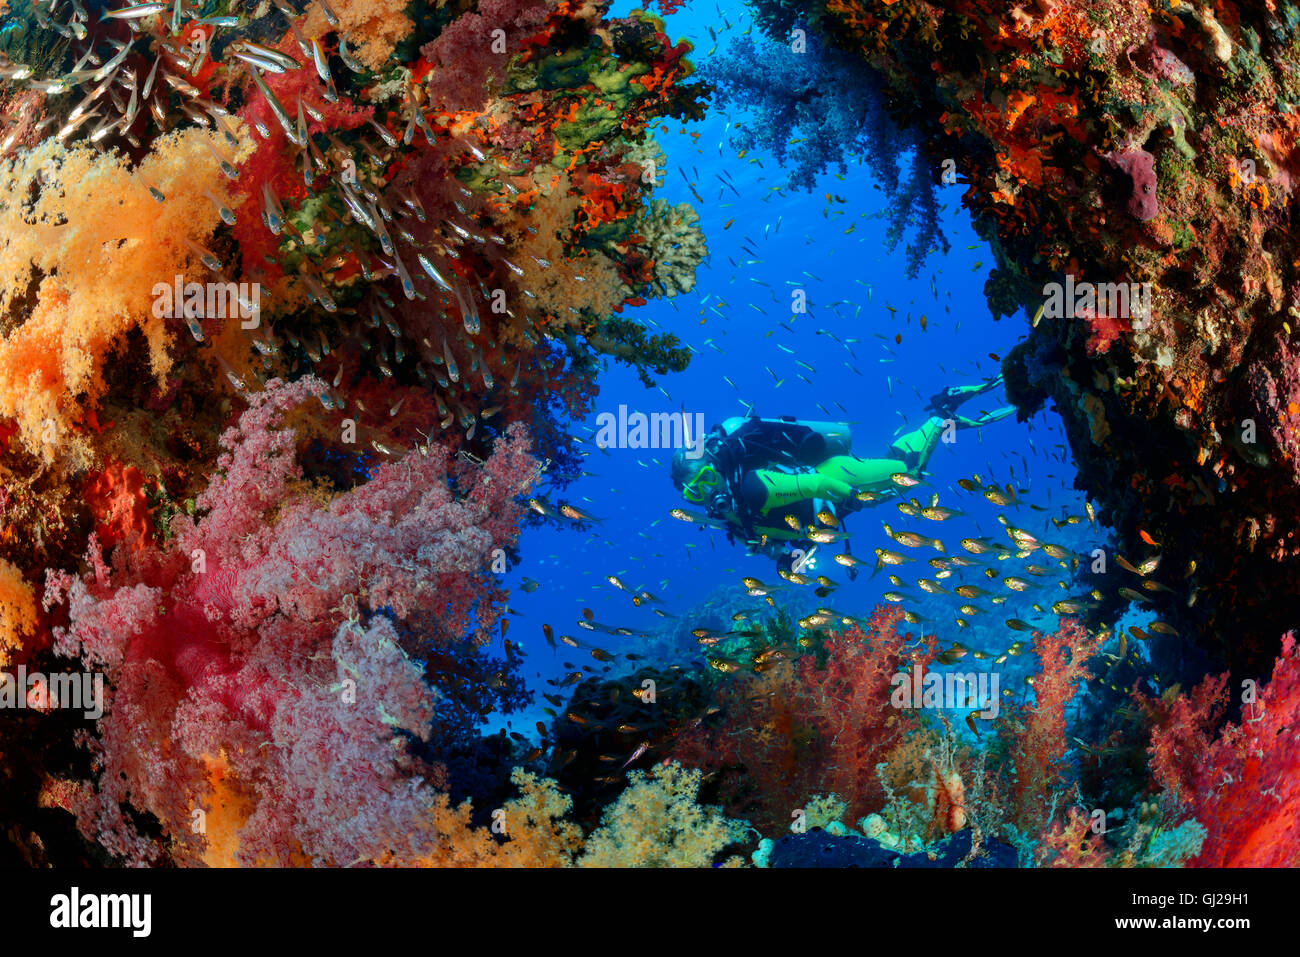 Coral reef with Hemprichs Red Soft Tree Coral and scuba diver, Wadi Gimal, Marsa Alam, Red Sea, Egypt Stock Photo